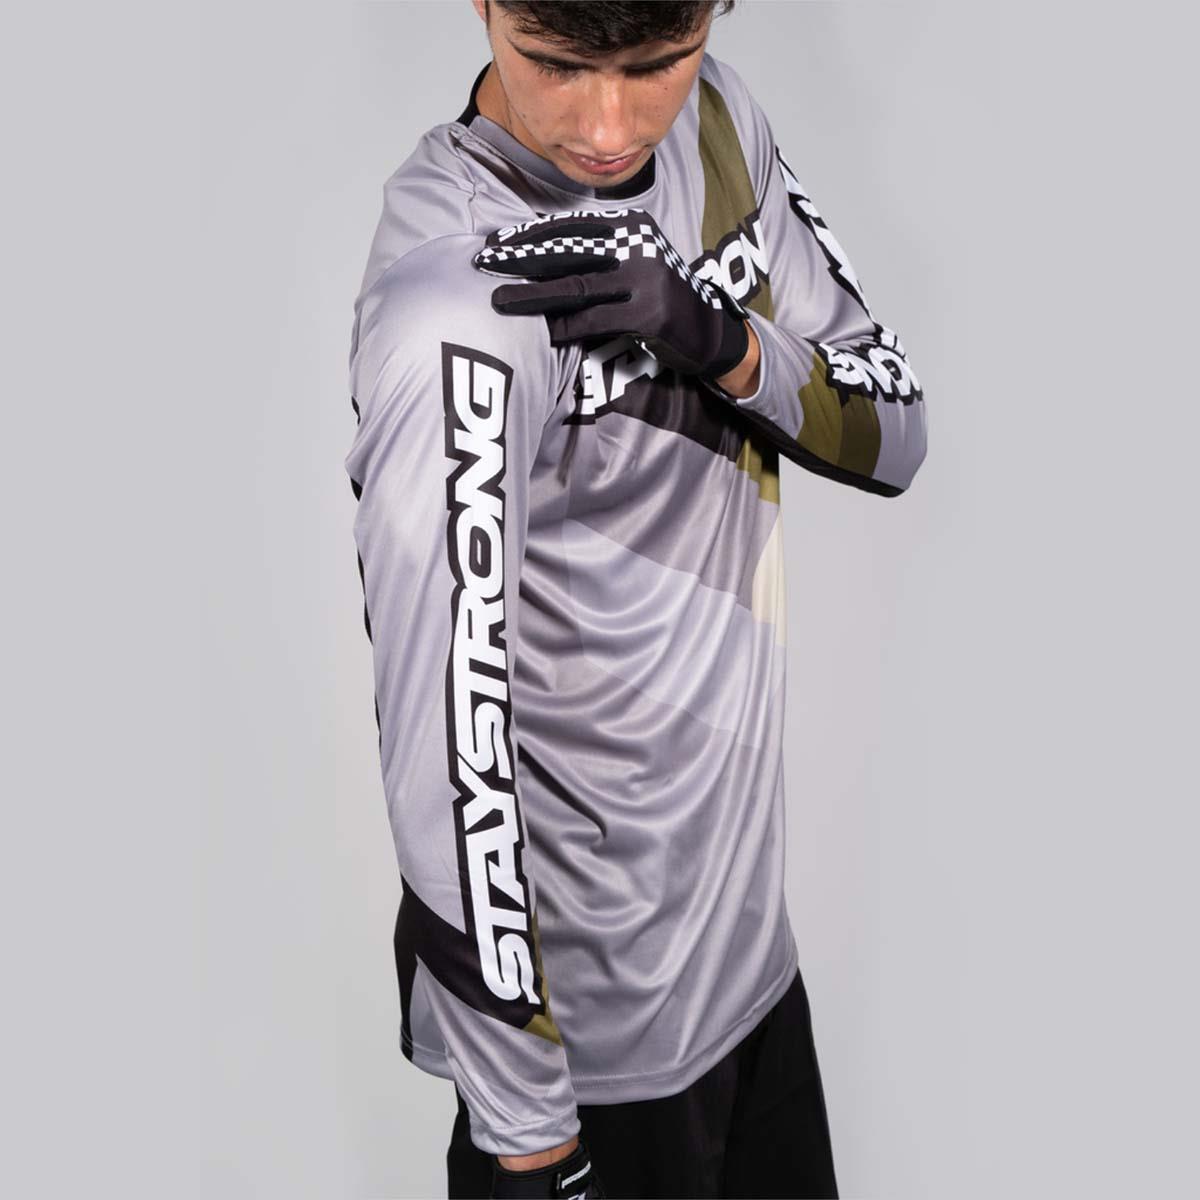 Stay Strong Chevron Race Jersey - Grey